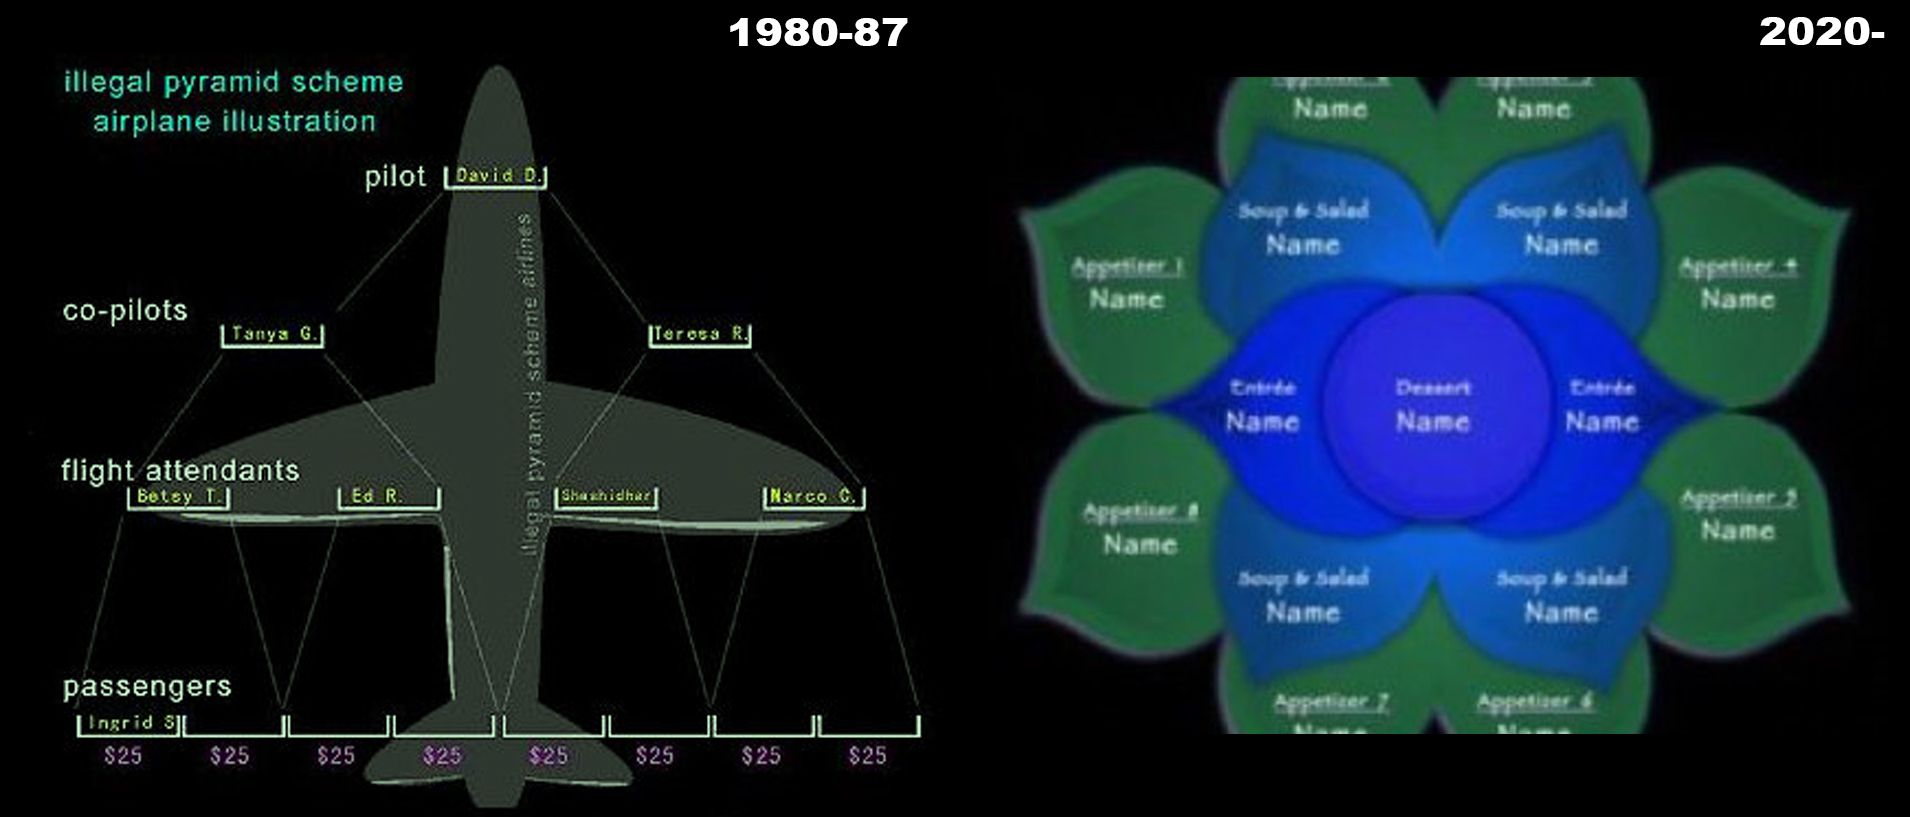 The airplane game, or “Plane Game” - 1980’s pyramid scheme gained popularity in human potential
movement before being shutdown by the FBI. The scheme resurfaced in 2020 on social media,
this time in the shape of a wheel, leaf, or flower.